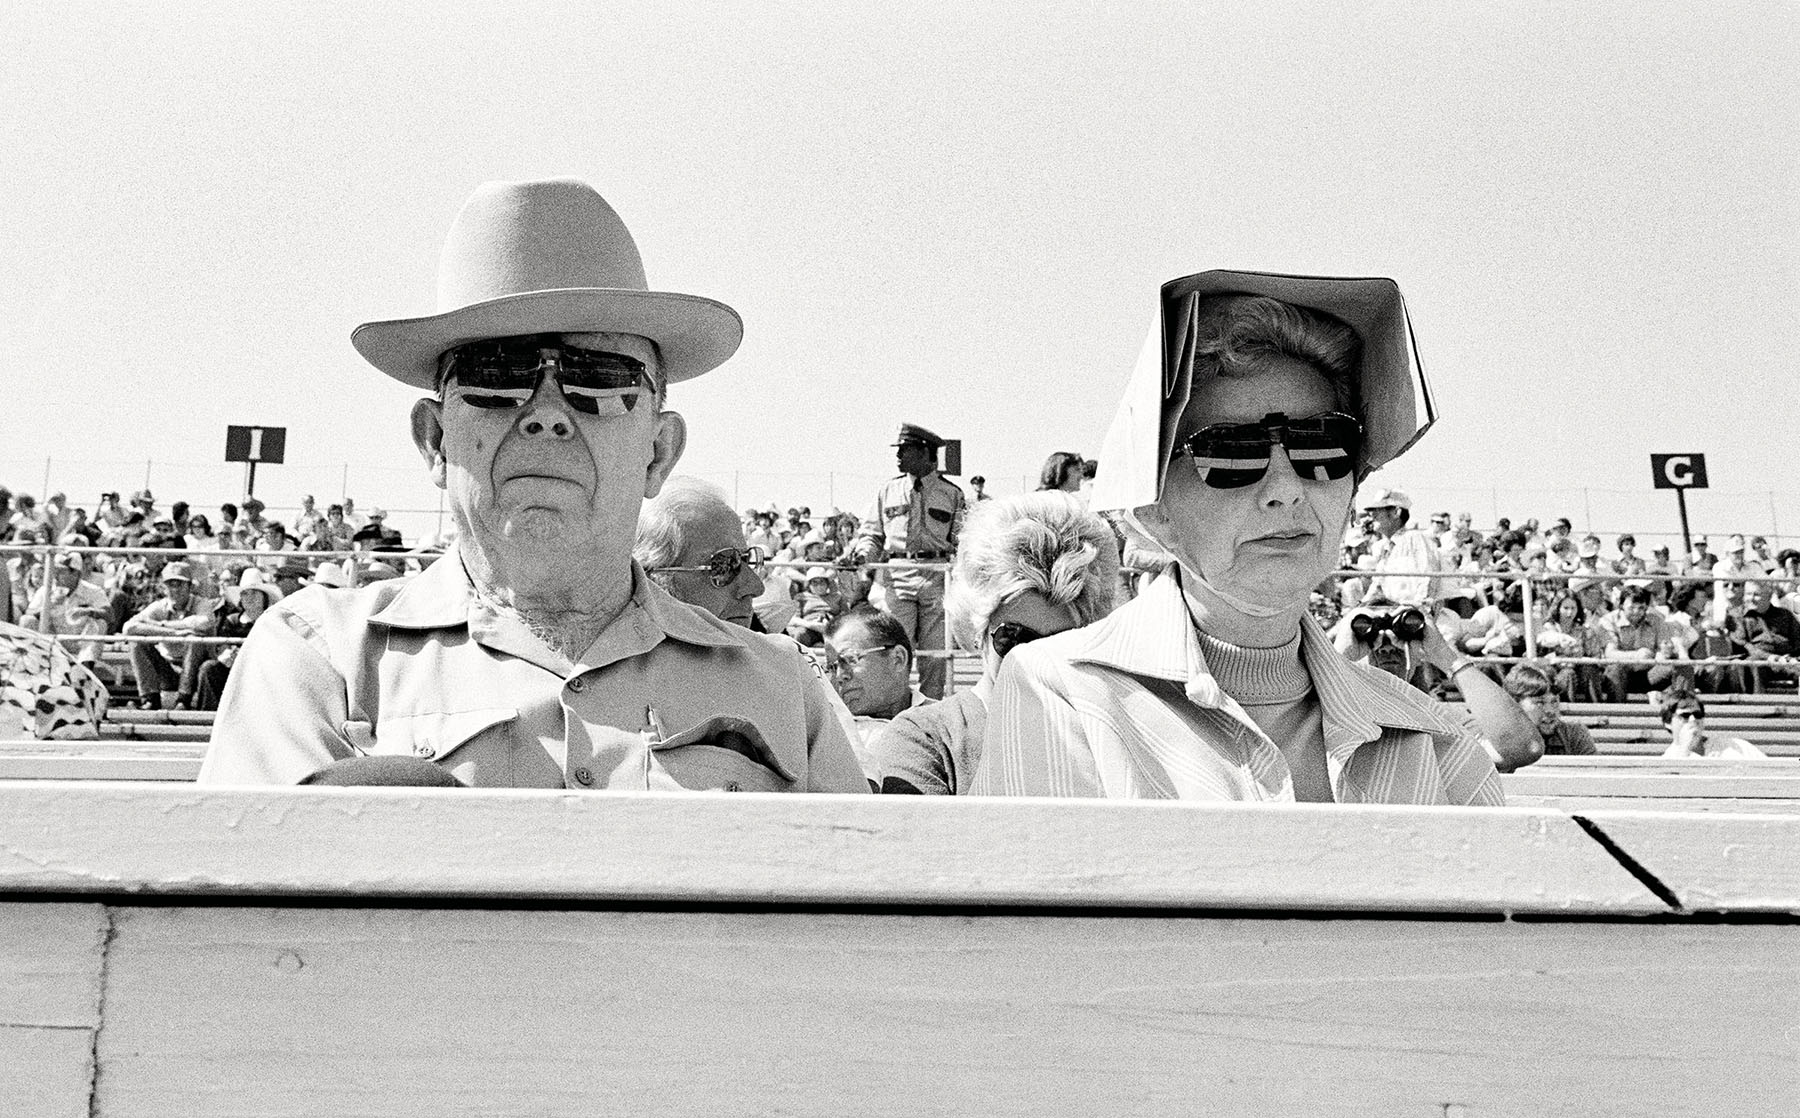 Two older people sit wearing sunglasses in the stands of a rodeo among other people